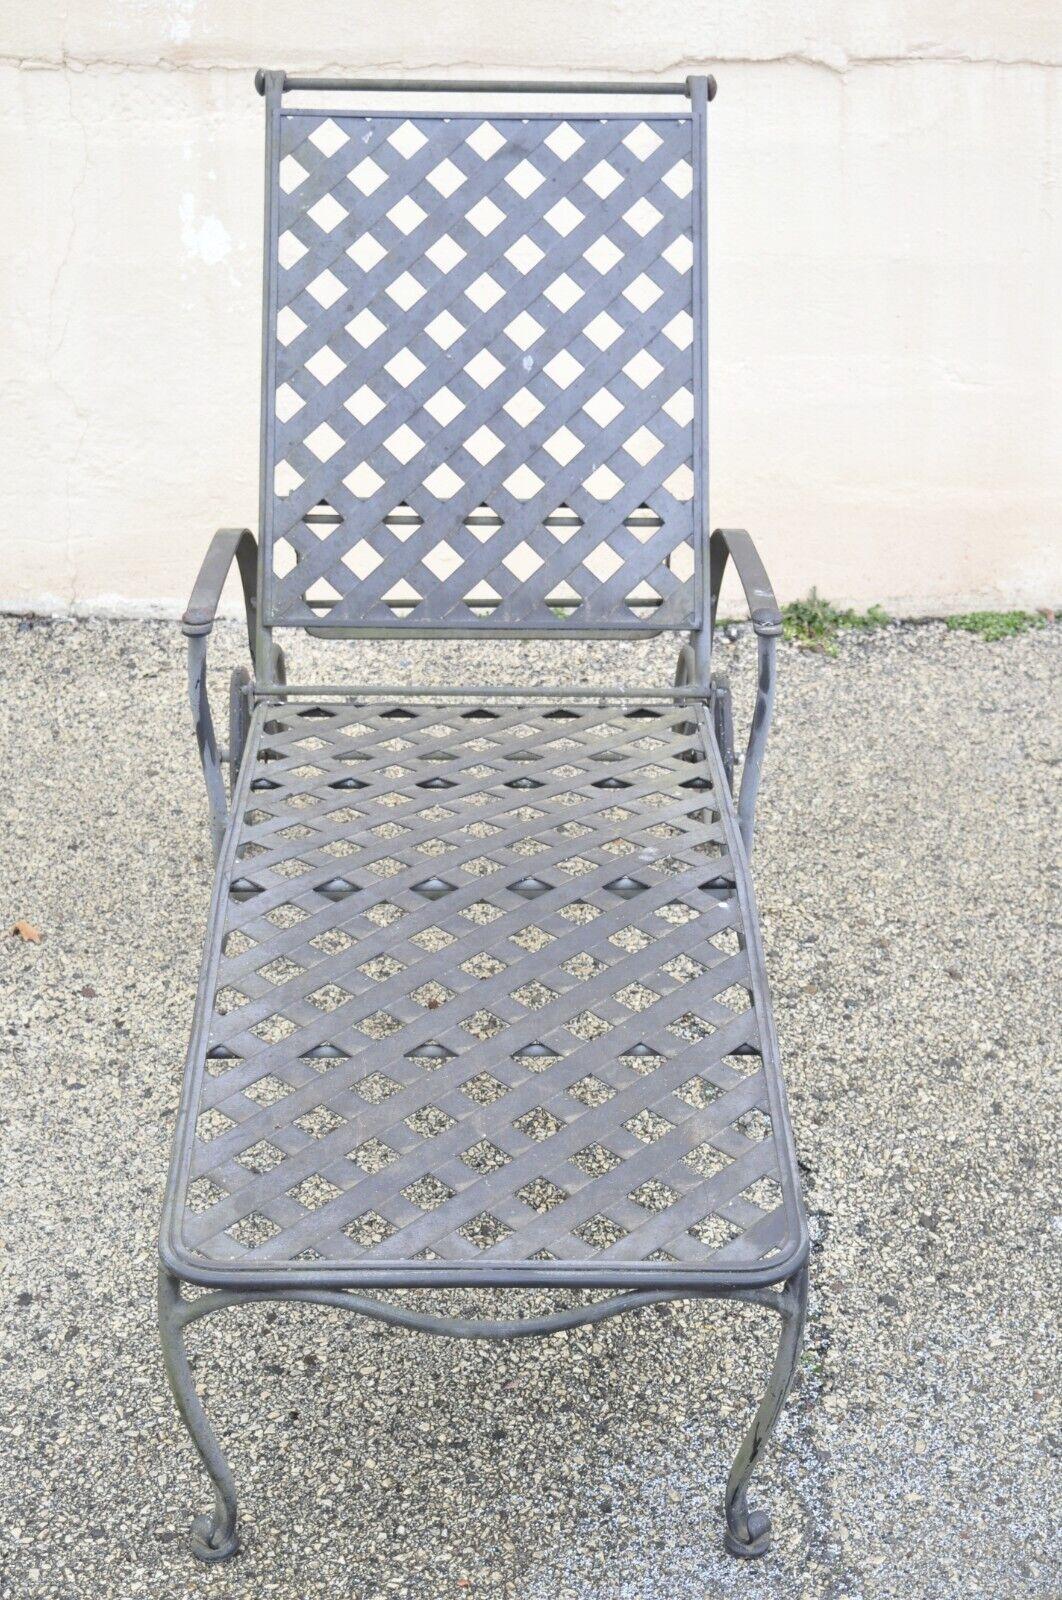 vintage metal chaise lounge with wheels